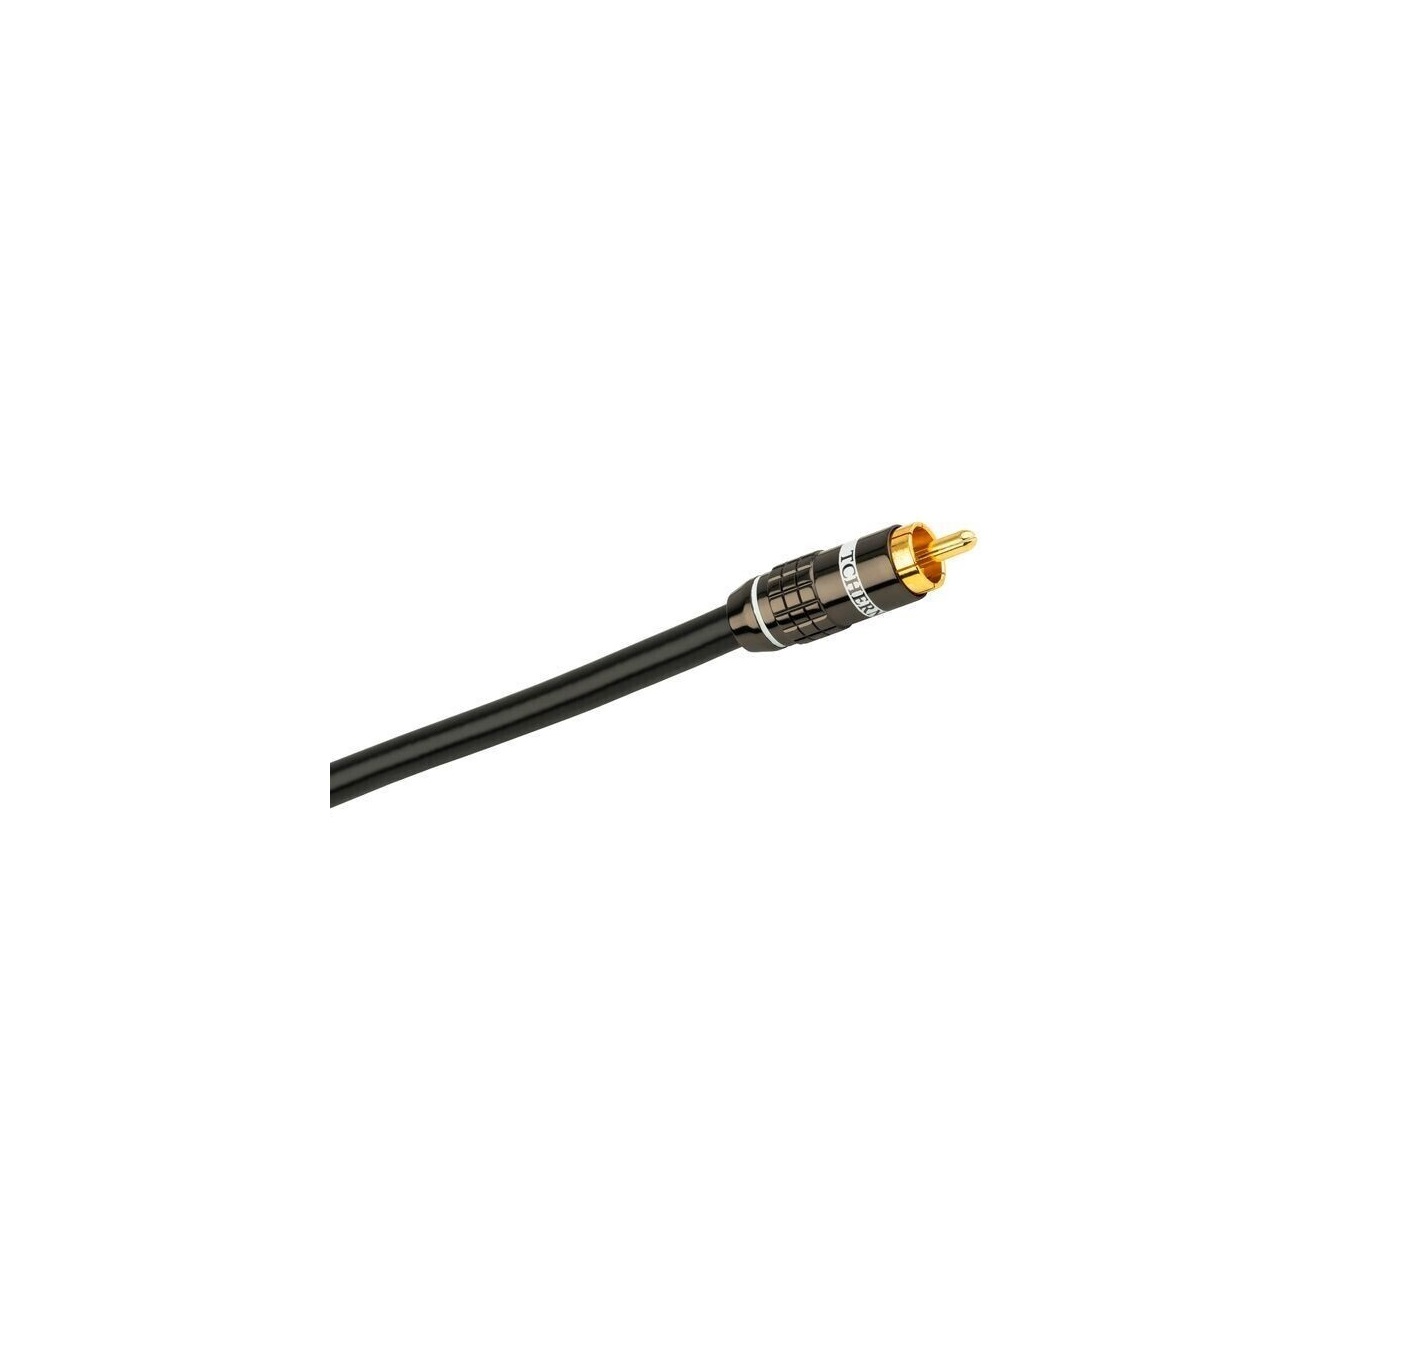 Кабели межблочные аудио Tchernov Cable Standard Balanced IC / Sub RCA (5 m) кабели межблочные аудио tchernov cable special coaxial ic digital rca s pdif 0 62m